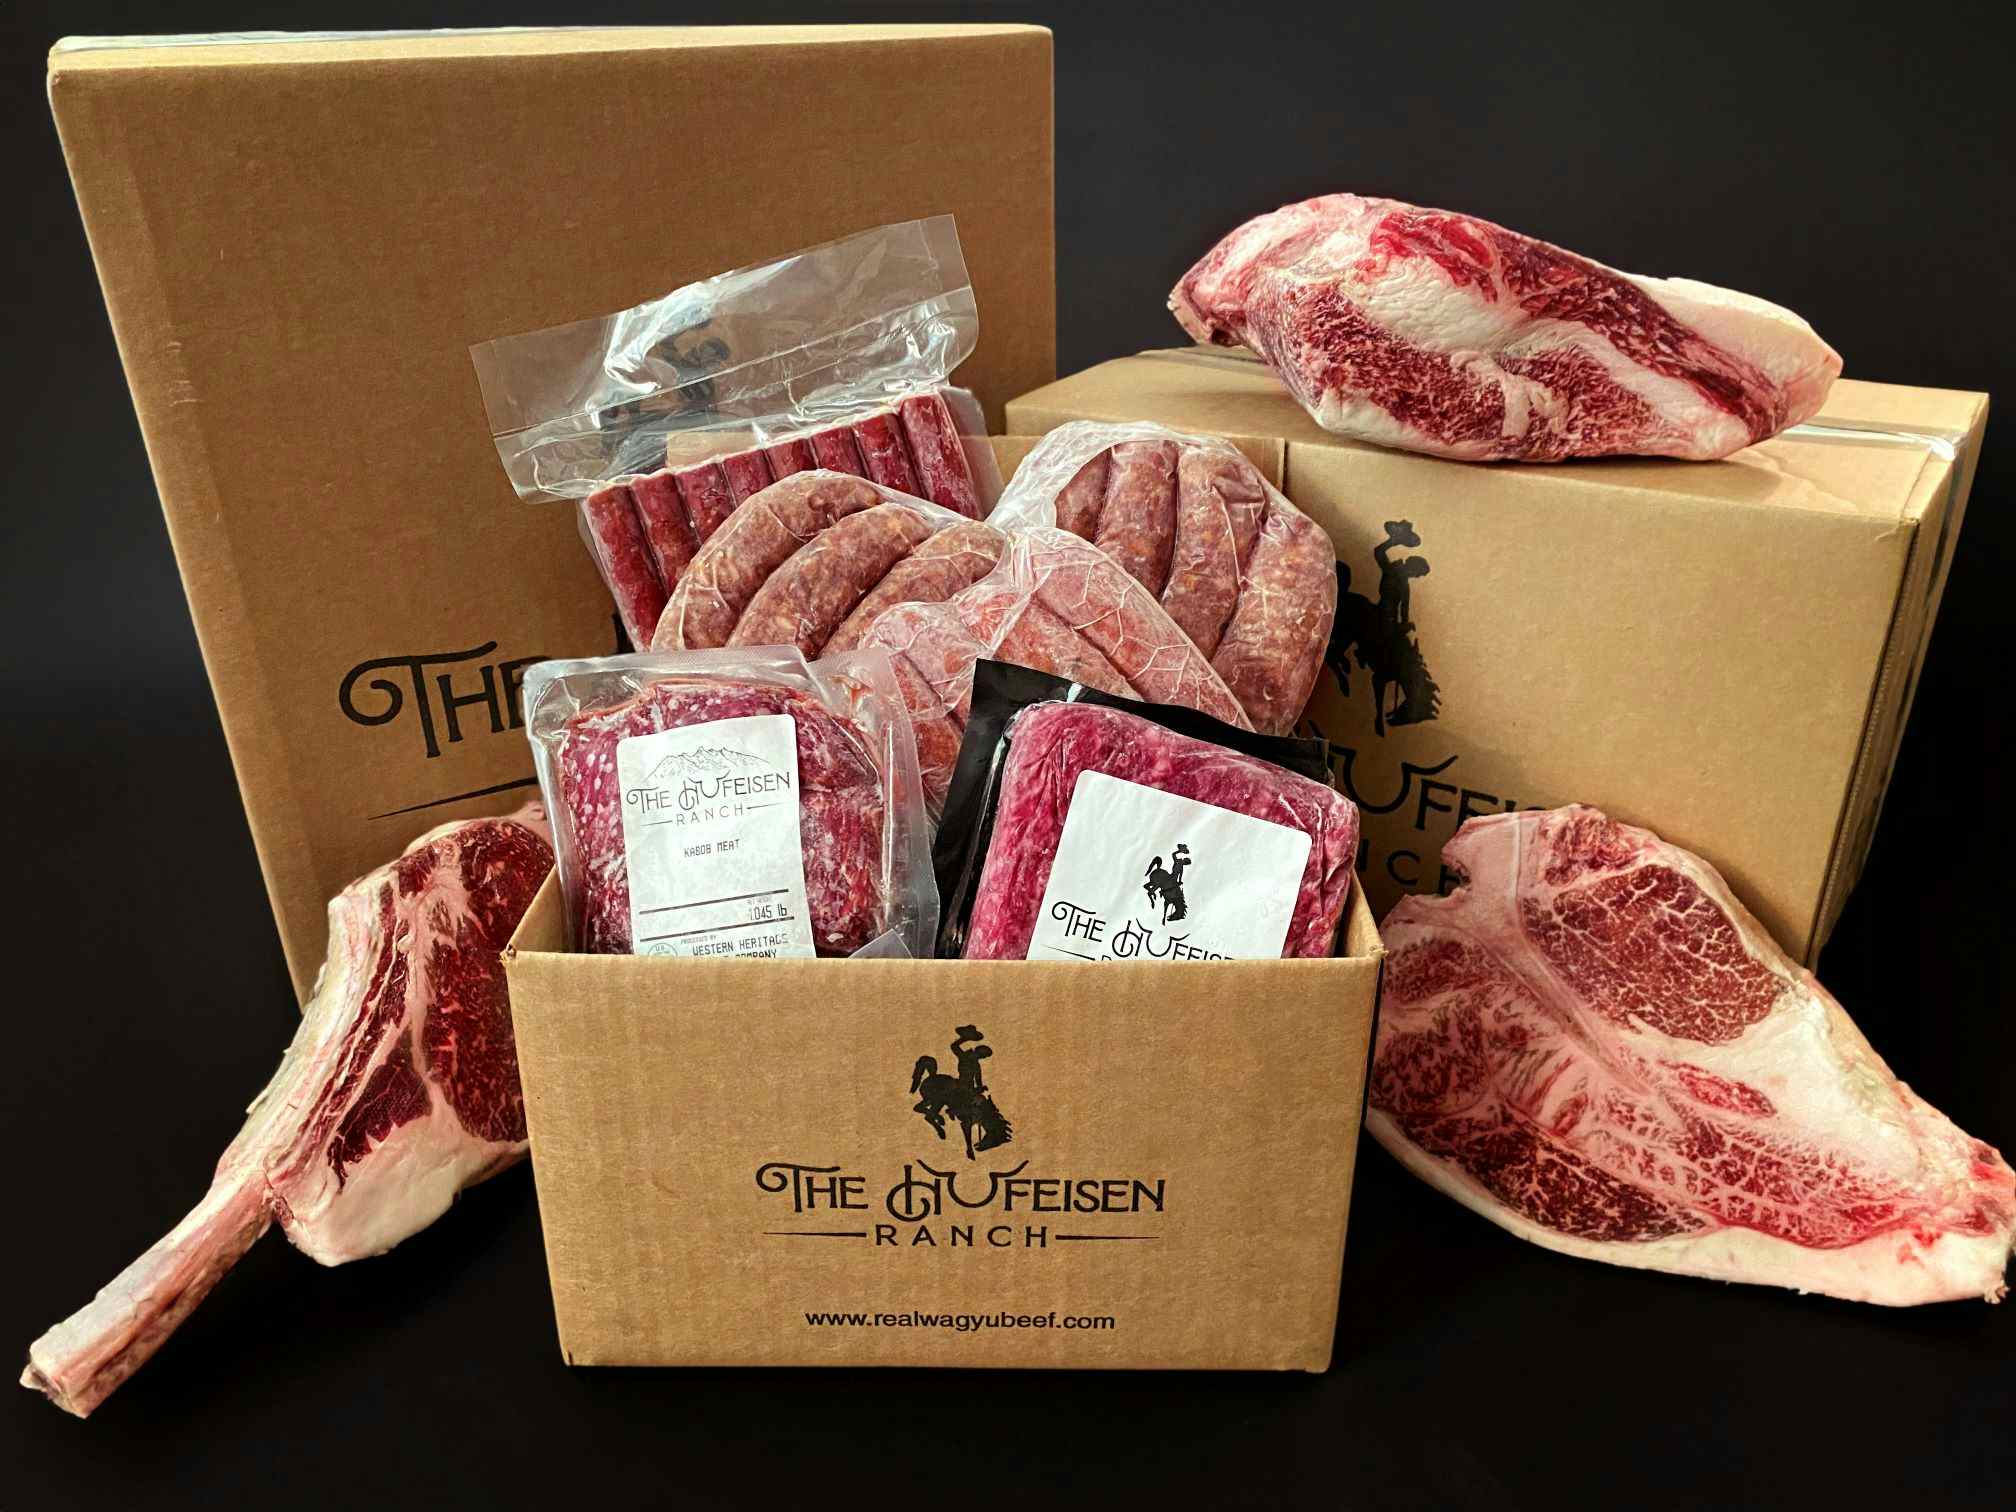 100% All-Natural Grass & Flax Fed Wagyu 1/4th Beef Box  - 100lbs of Wagyu Beef